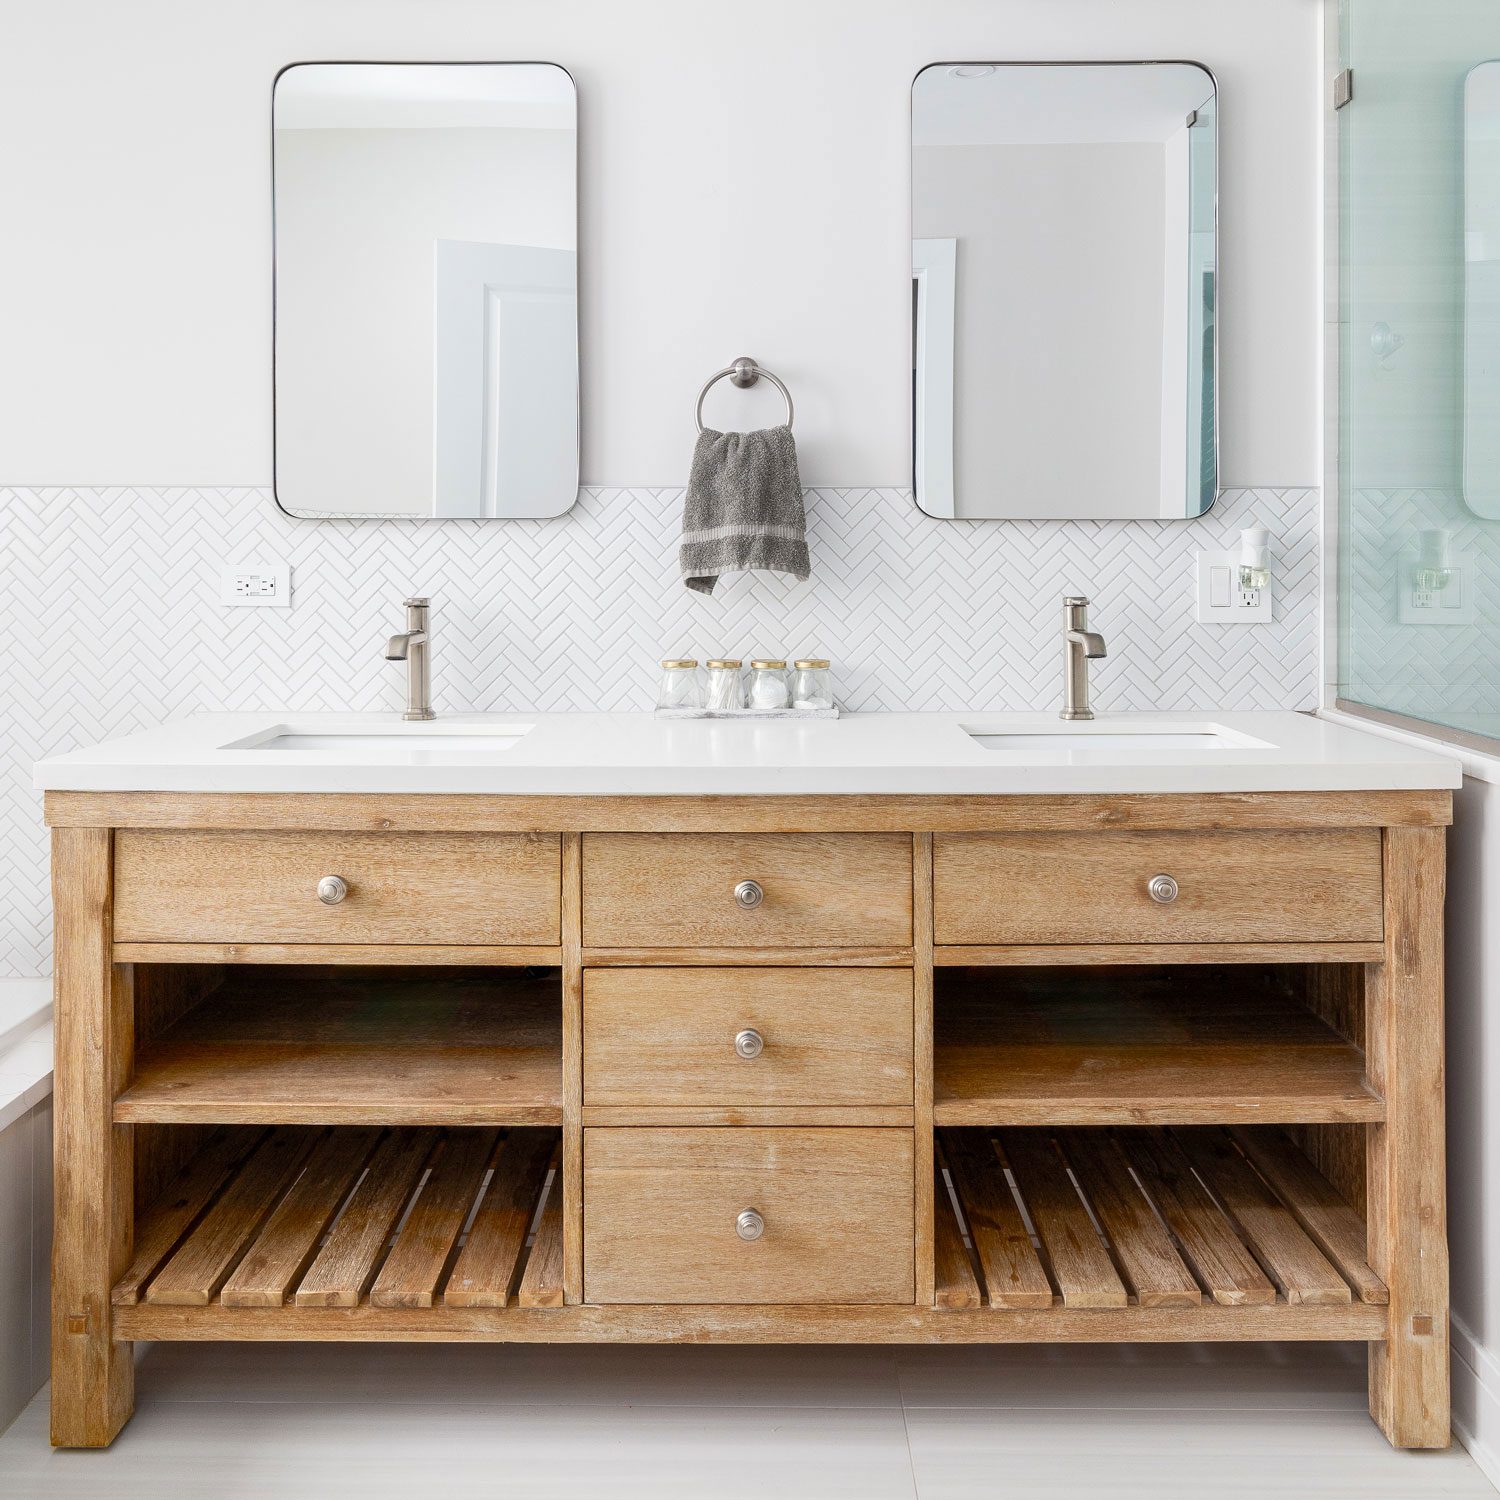 A Cozy Bathroom With A White Oak Vanity Cabinet White Countertop